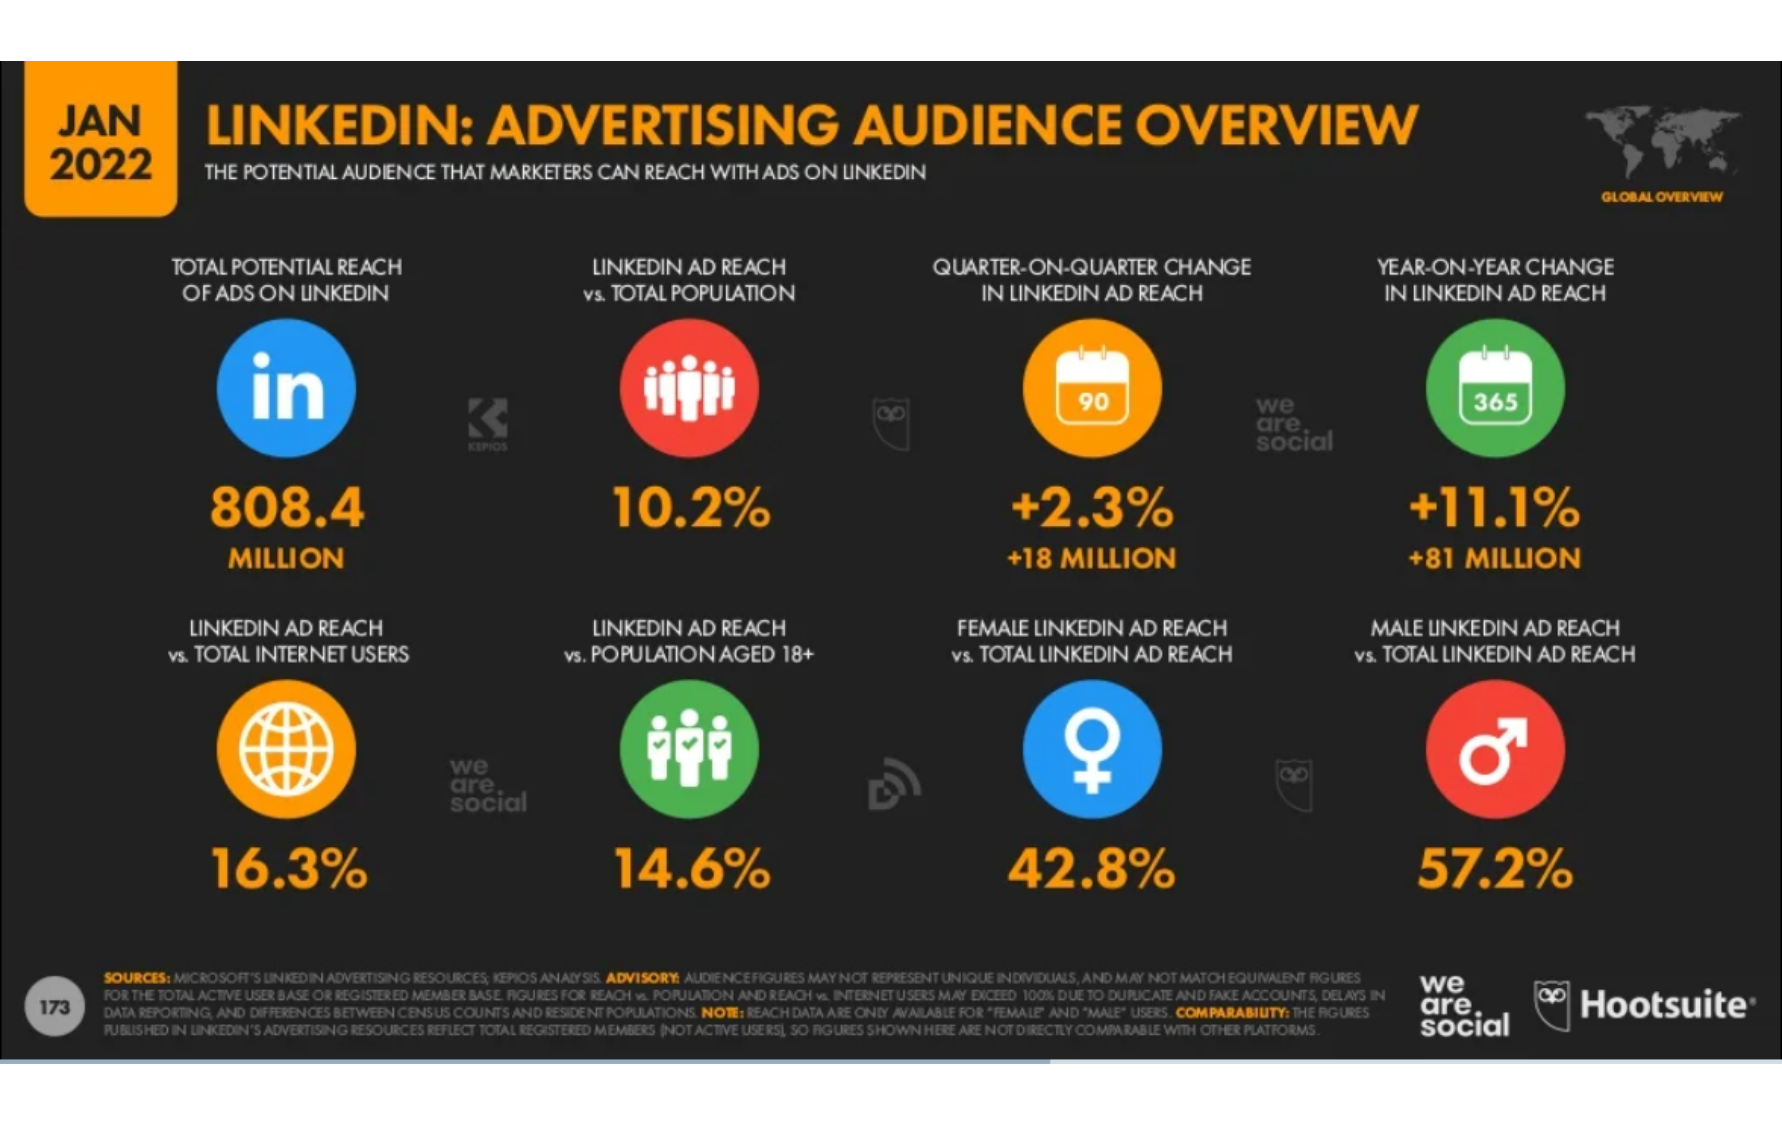 An infographic of Linkedin's advertising audience overview. Potential reach of ads on LinkedIn: 808.4 million. LinkedIn ad reach vs Total Population: 10.2%. Quarter-on-quarter change on LinkedIn ad reach: +2.3%/+18 million. Year-on-year change of same: +11.1%/+81 million. LinkedIn ad reach vs total internet users: 16.3%. LinkedIn ad reach vs adult population: 14.6%. Female LinkedIn ad reach vs total: 42.8%. Male LinkedIn ad reach vs total: 57.2%